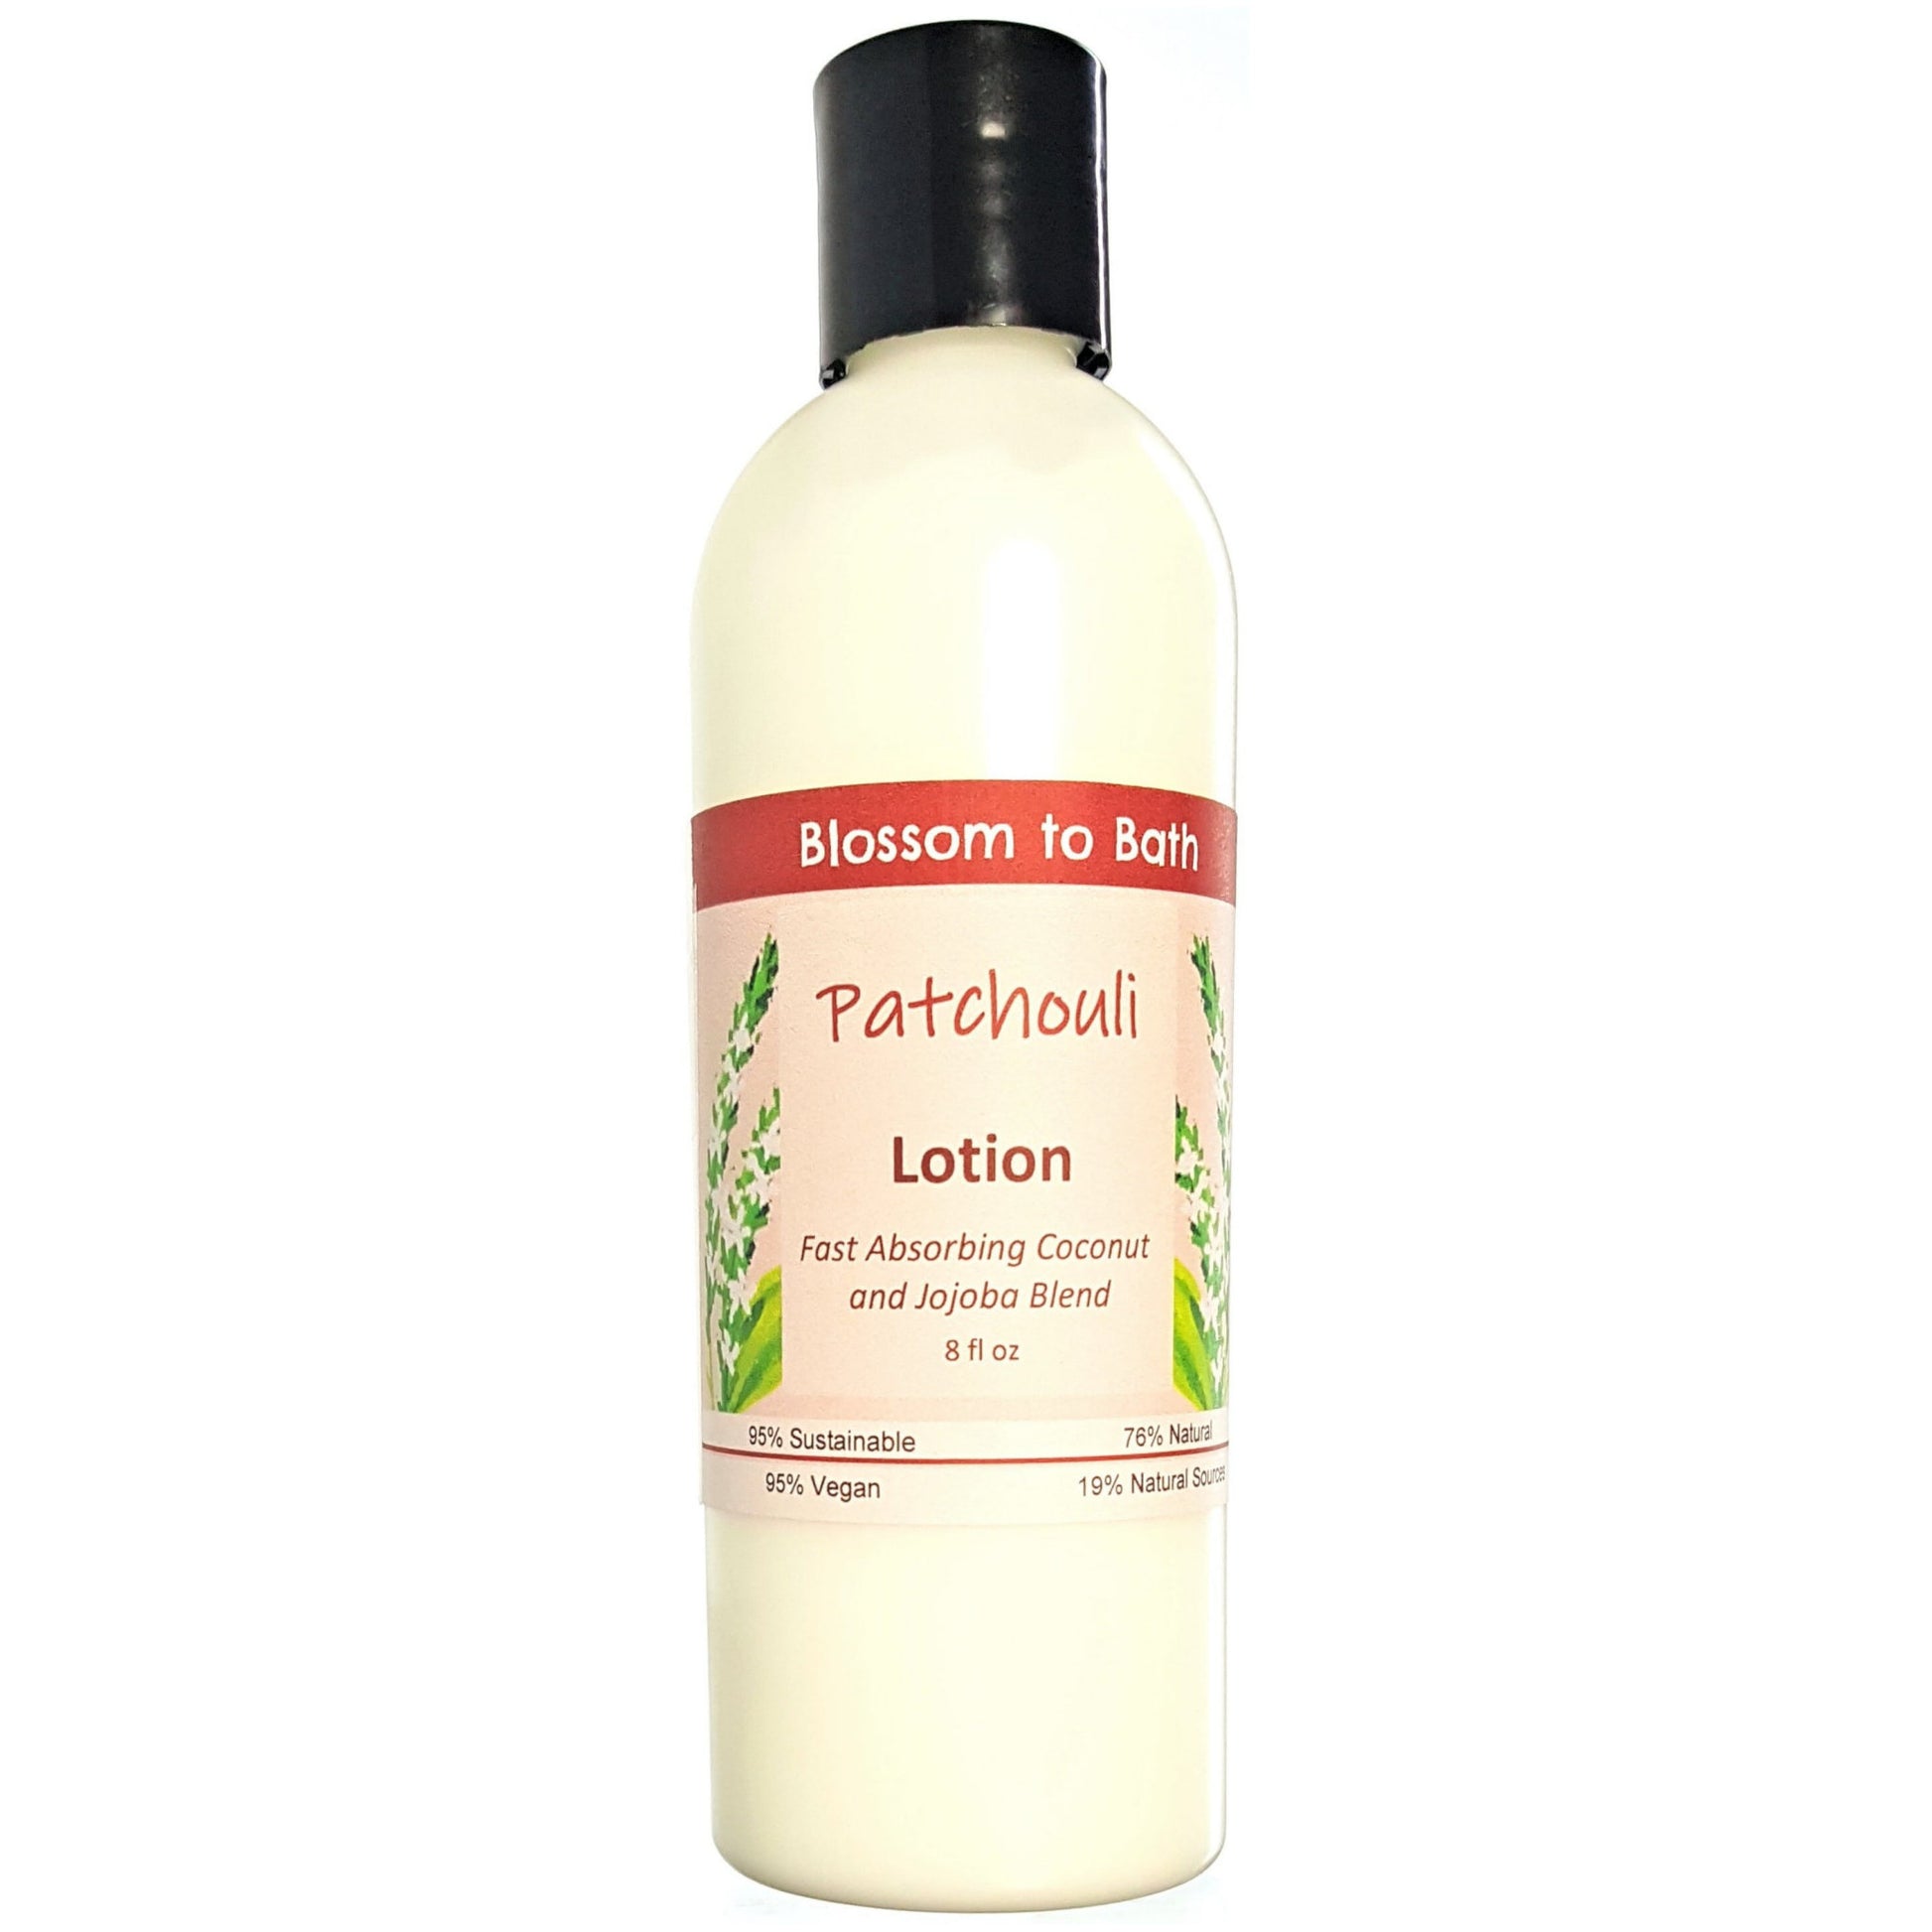 Buy Blossom to Bath Patchouli Lotion from Flowersong Soap Studio.  Daily moisture luxury that soaks in quickly made with organic oils and butters that soften and smooth the skin  The pure earthy, woody, spicy scent of straight Patchouli.